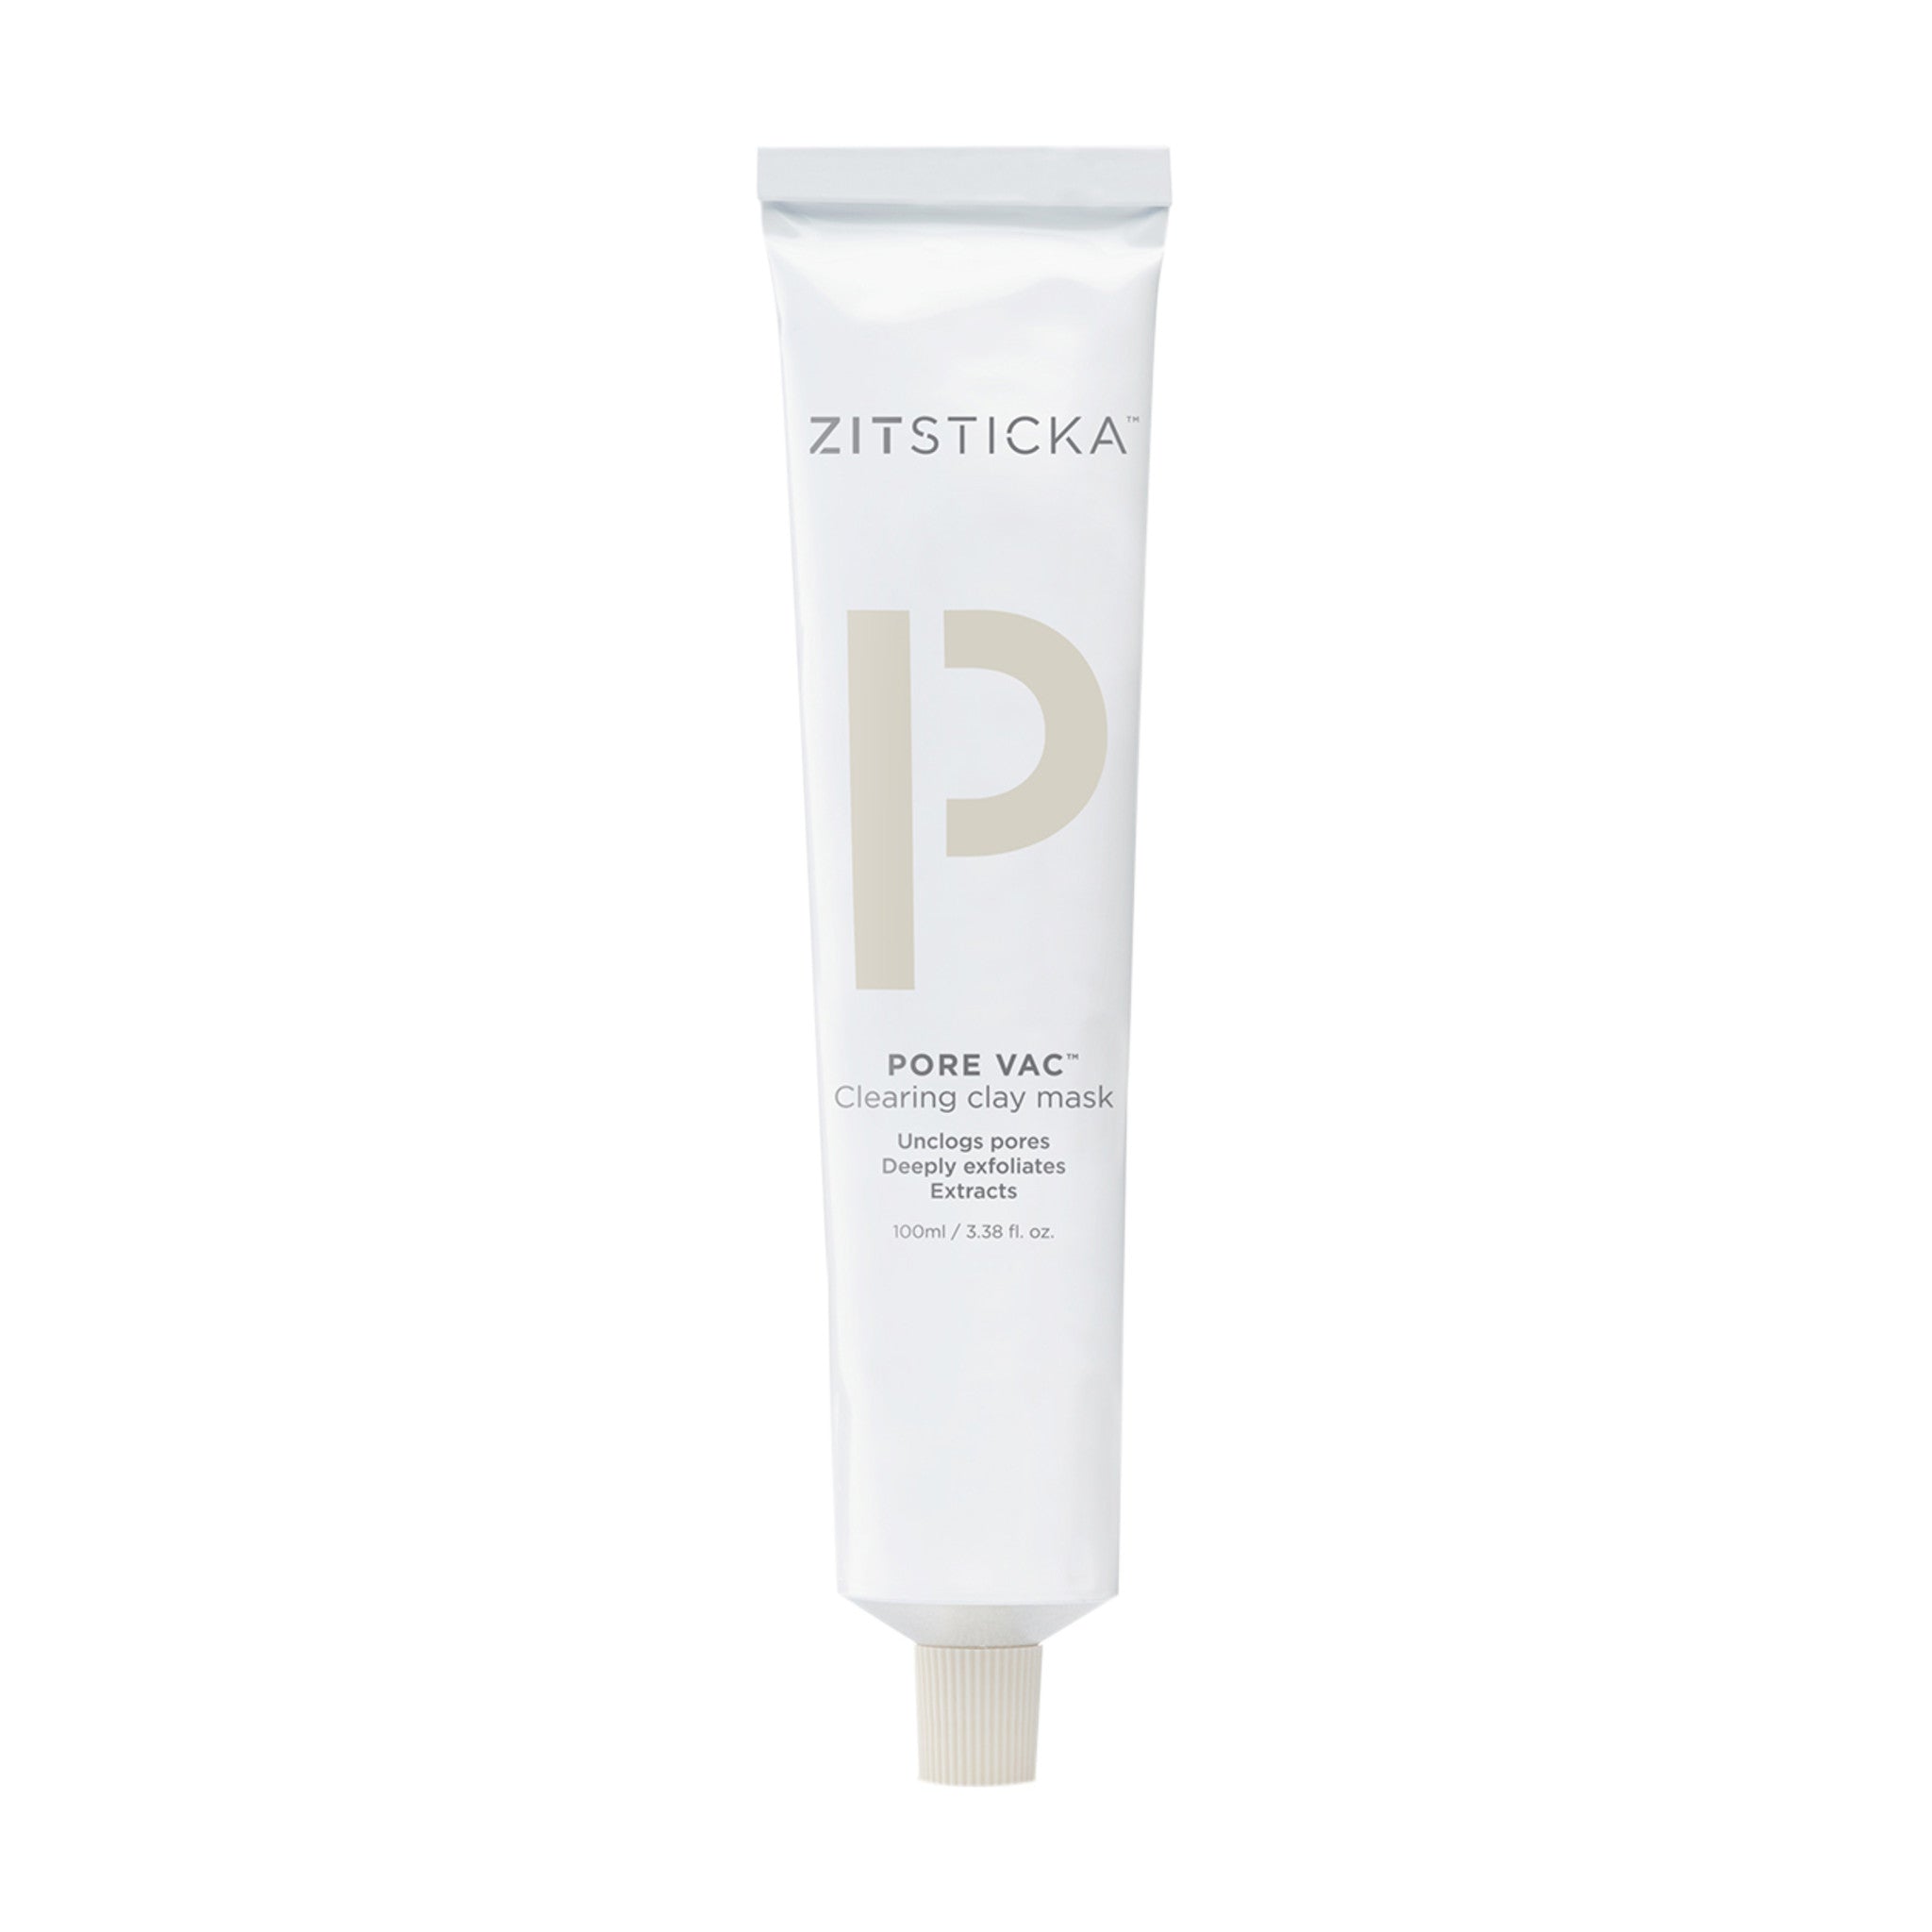 ZitSticka Pore Vac Pore Cleansing Clay Mask main image.